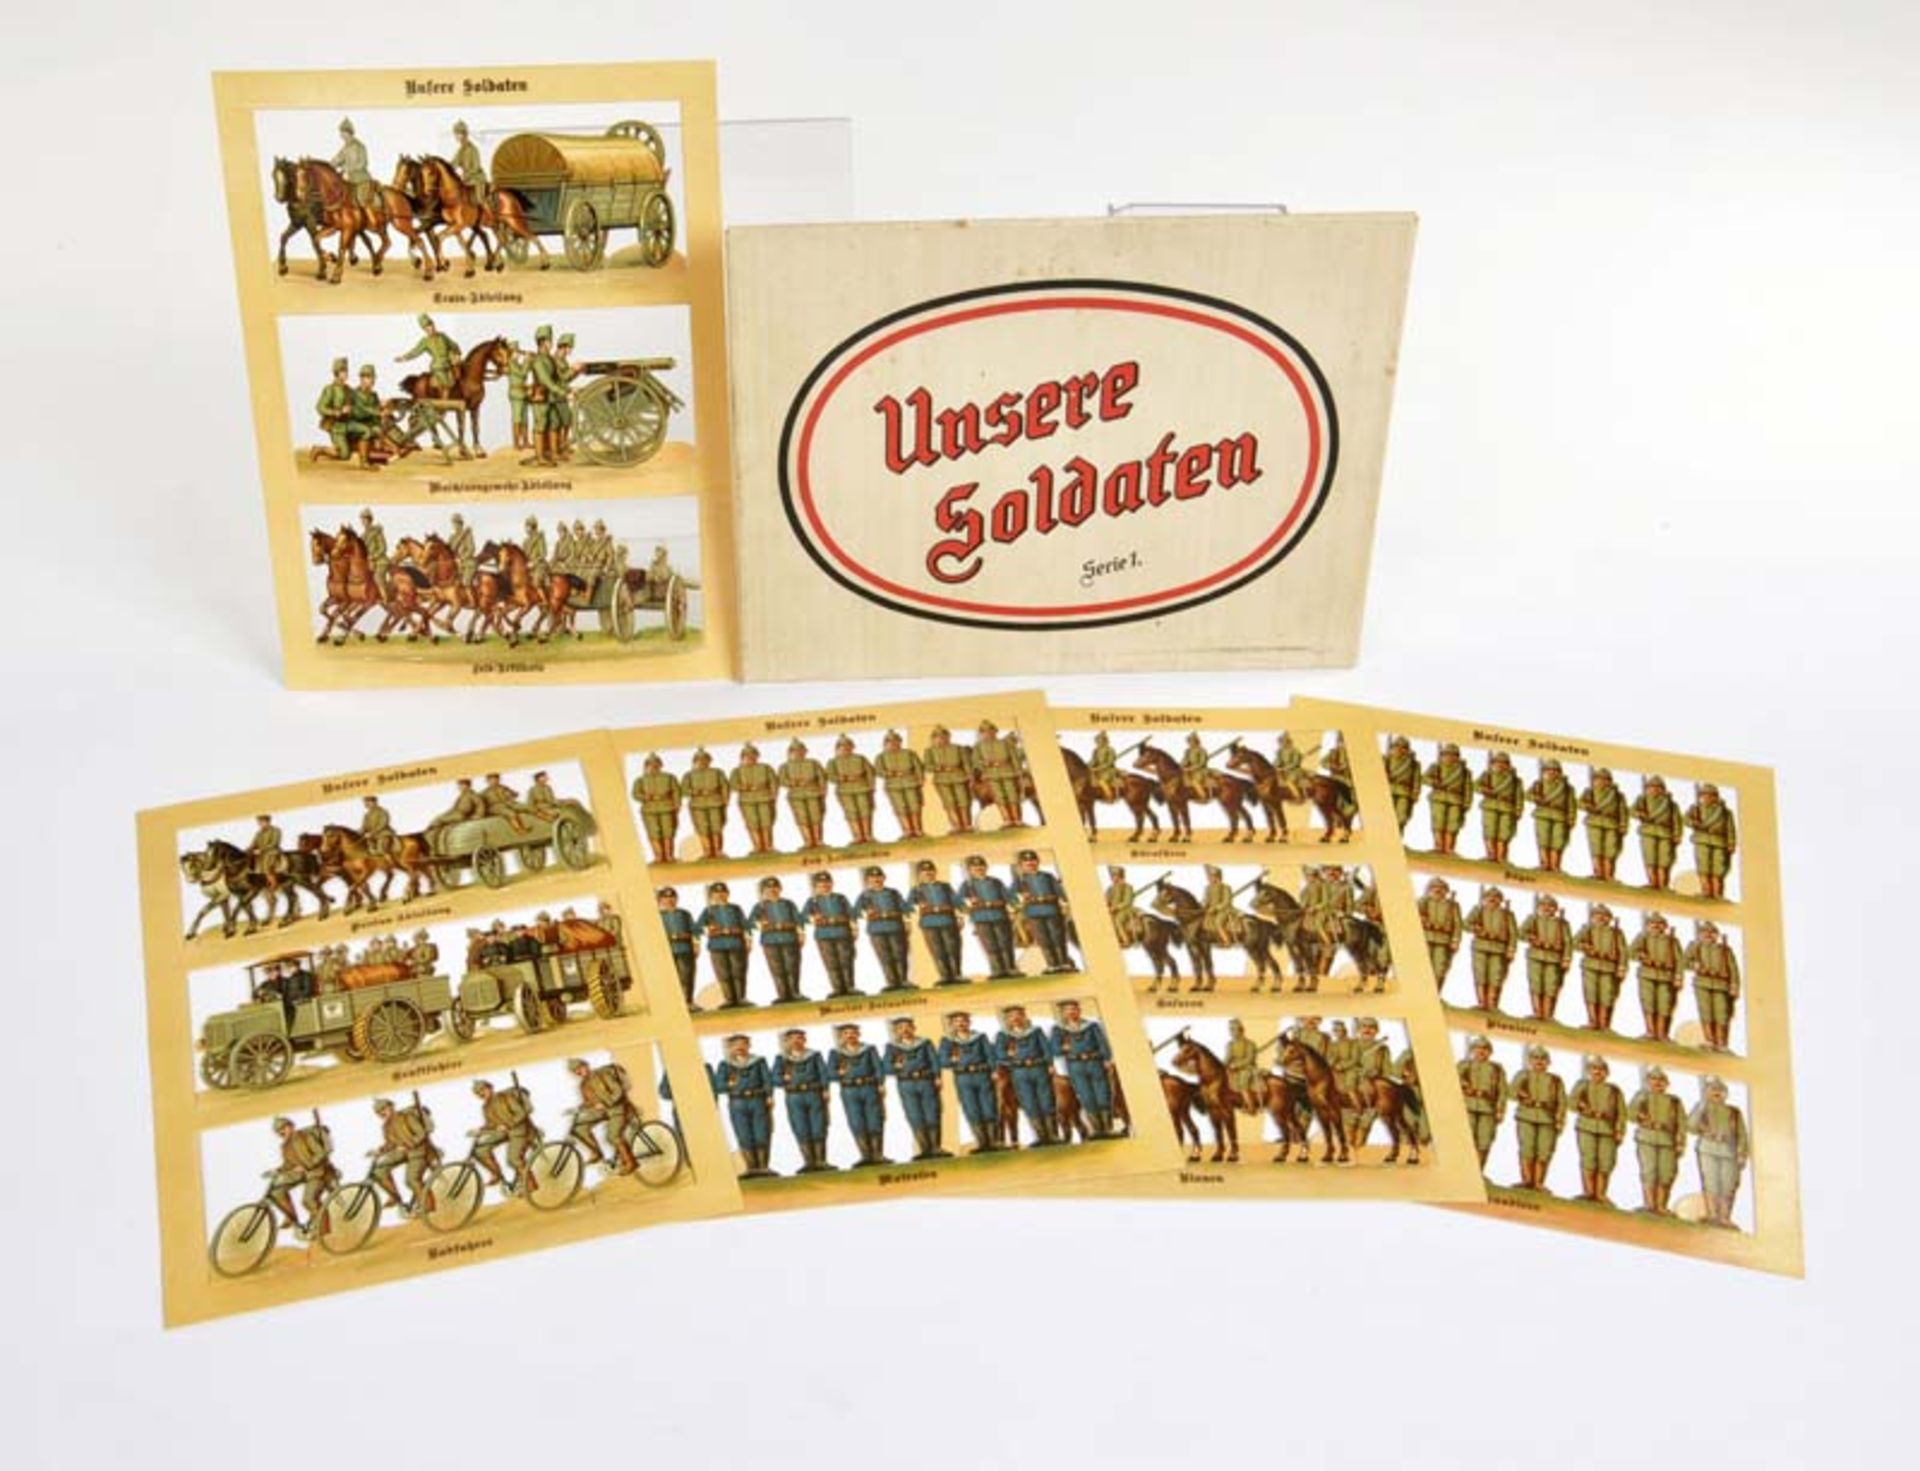 Cut Out Shut "Unsere Soldaten" Series 1, Germany pw, very good condition